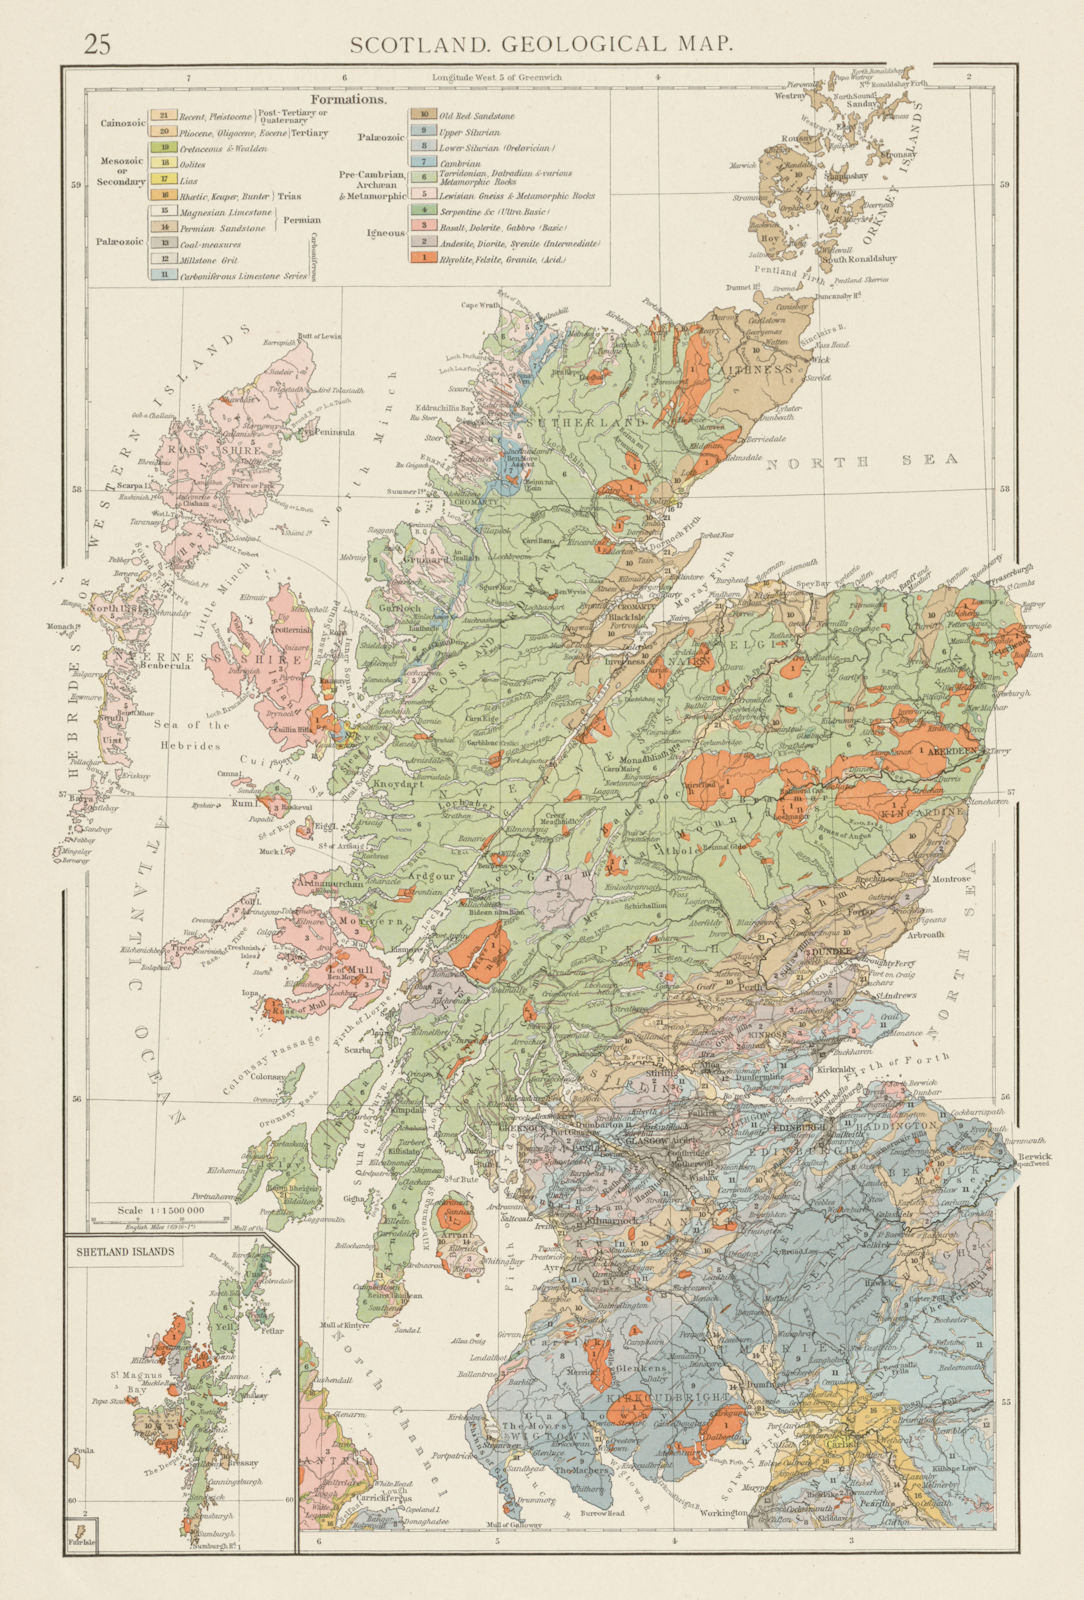 Associate Product Scotland, Geological map. THE TIMES 1900 old antique vintage plan chart